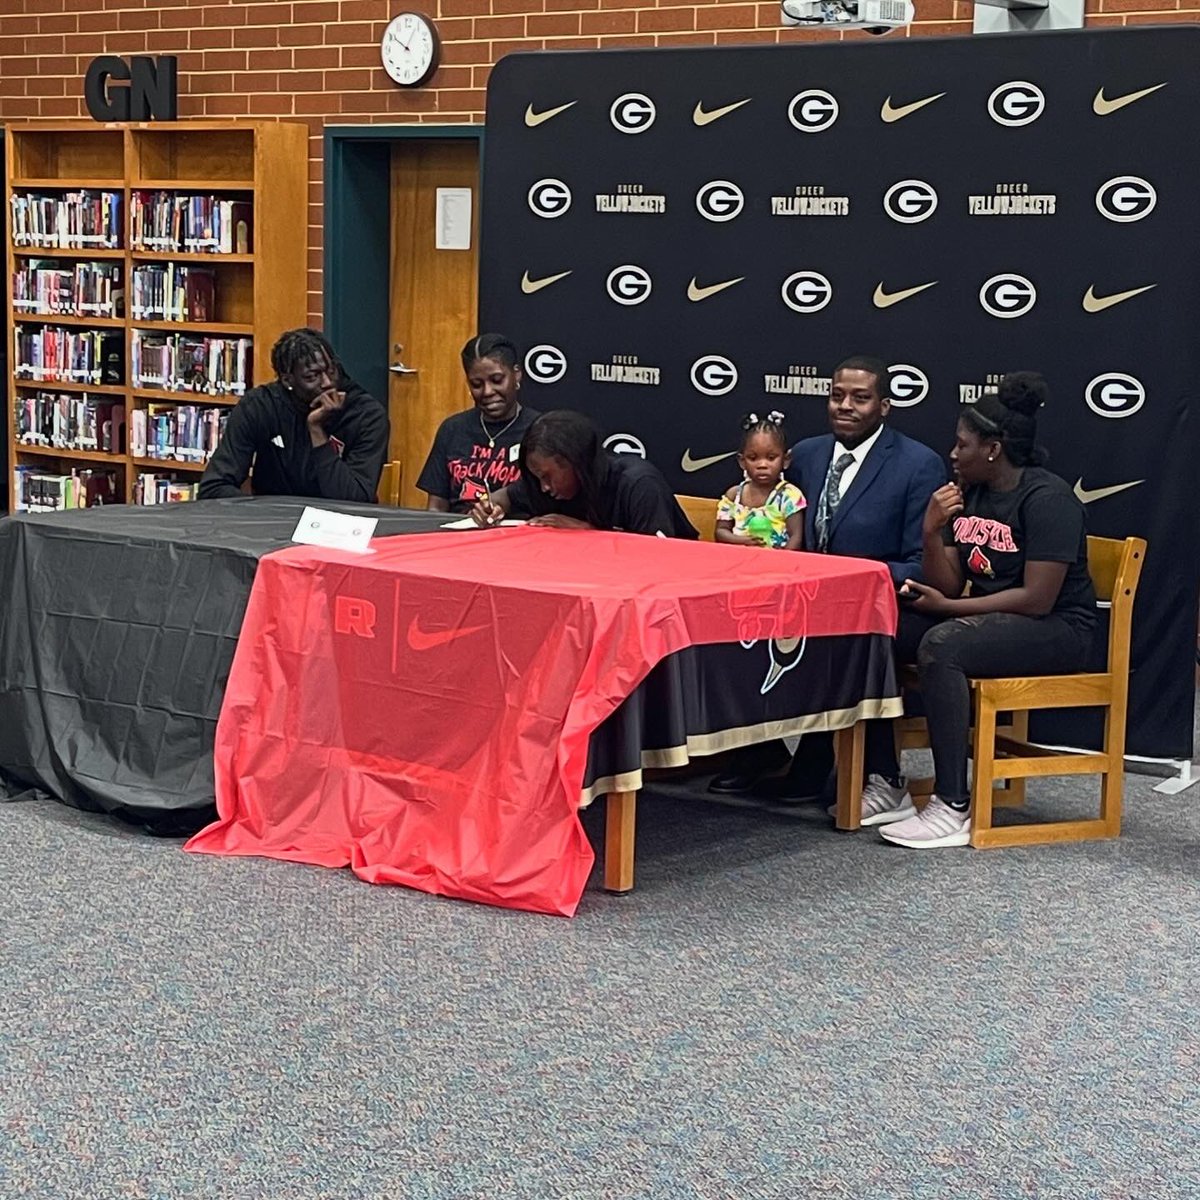 Congratulations to Jalasia Lewis on signing to further her academic and track & field career at the University of Louisville! 🎉🐝 Go Jackets!